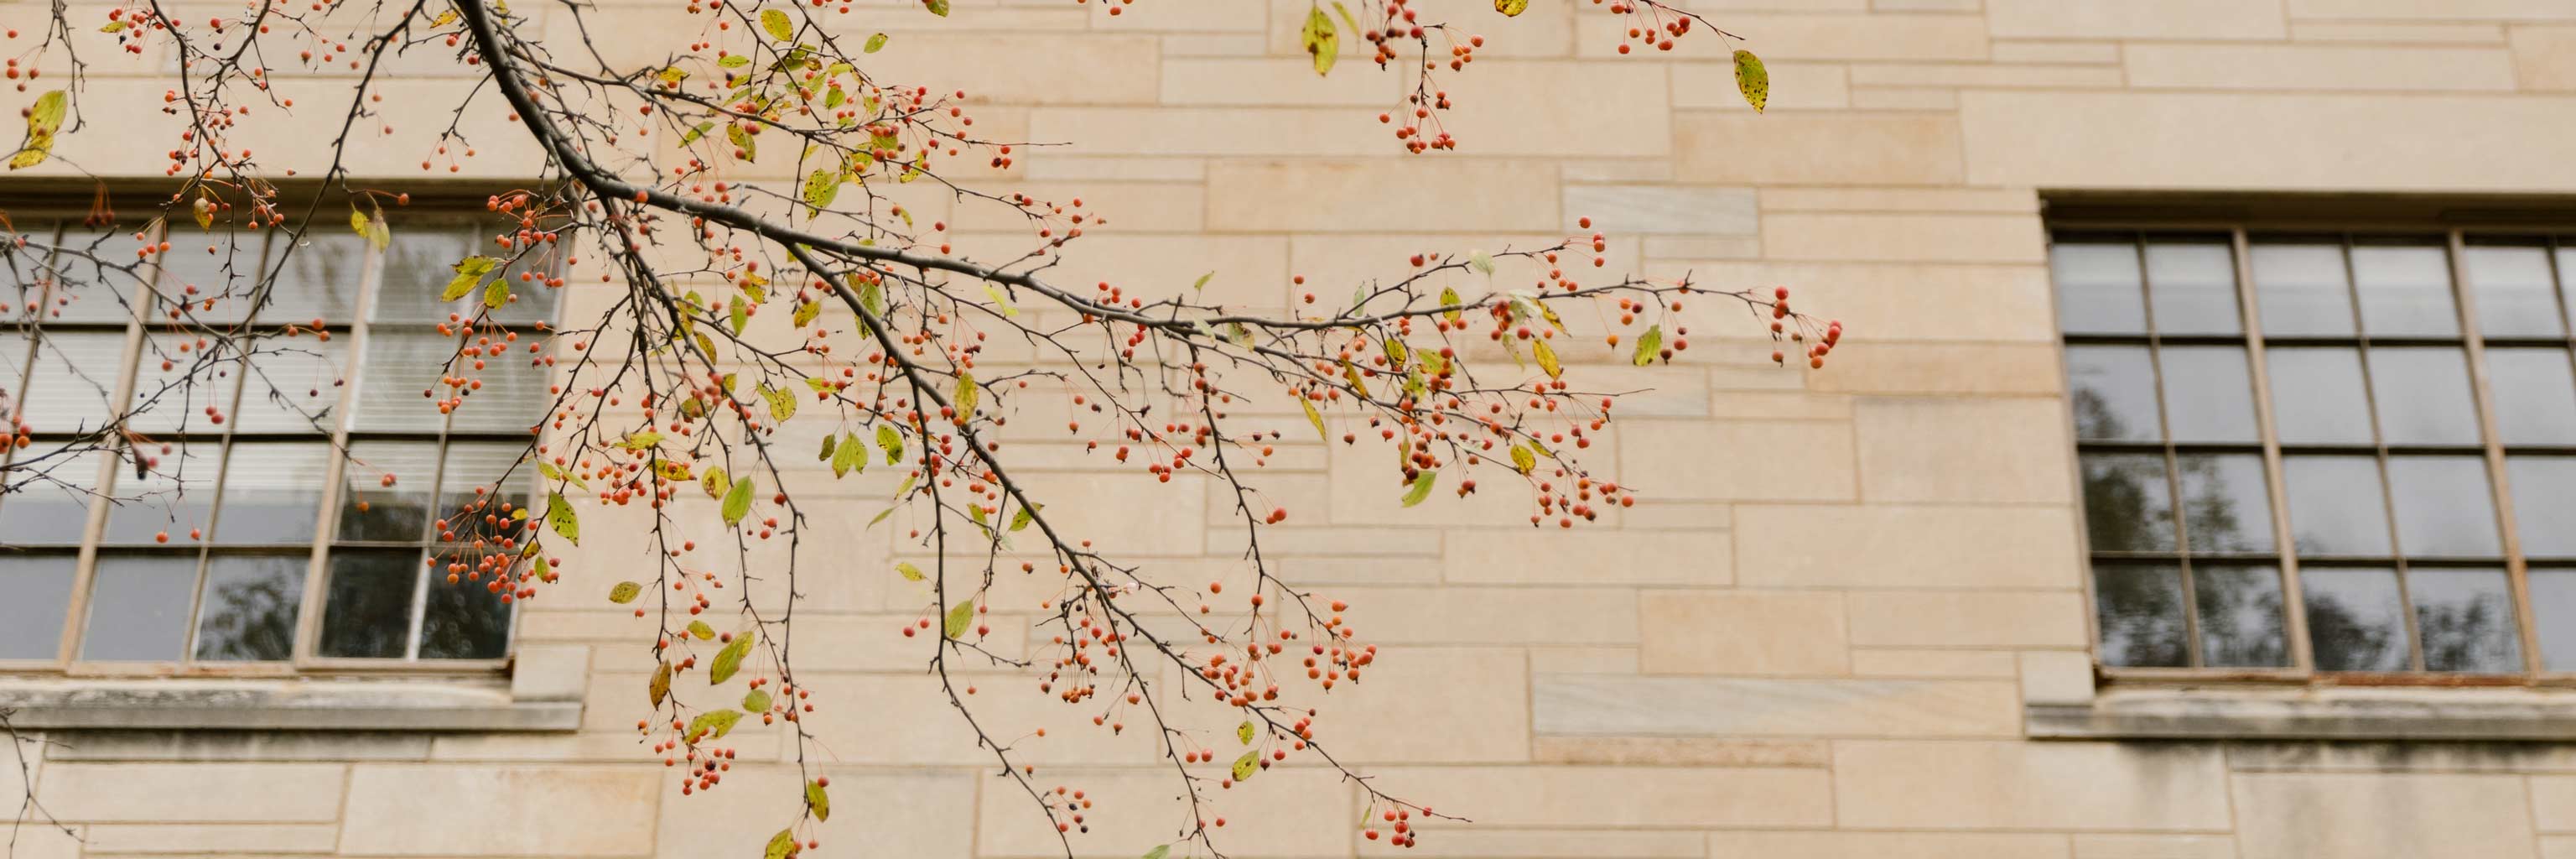 A tree branch with red berries hanging in front of a classroom building.